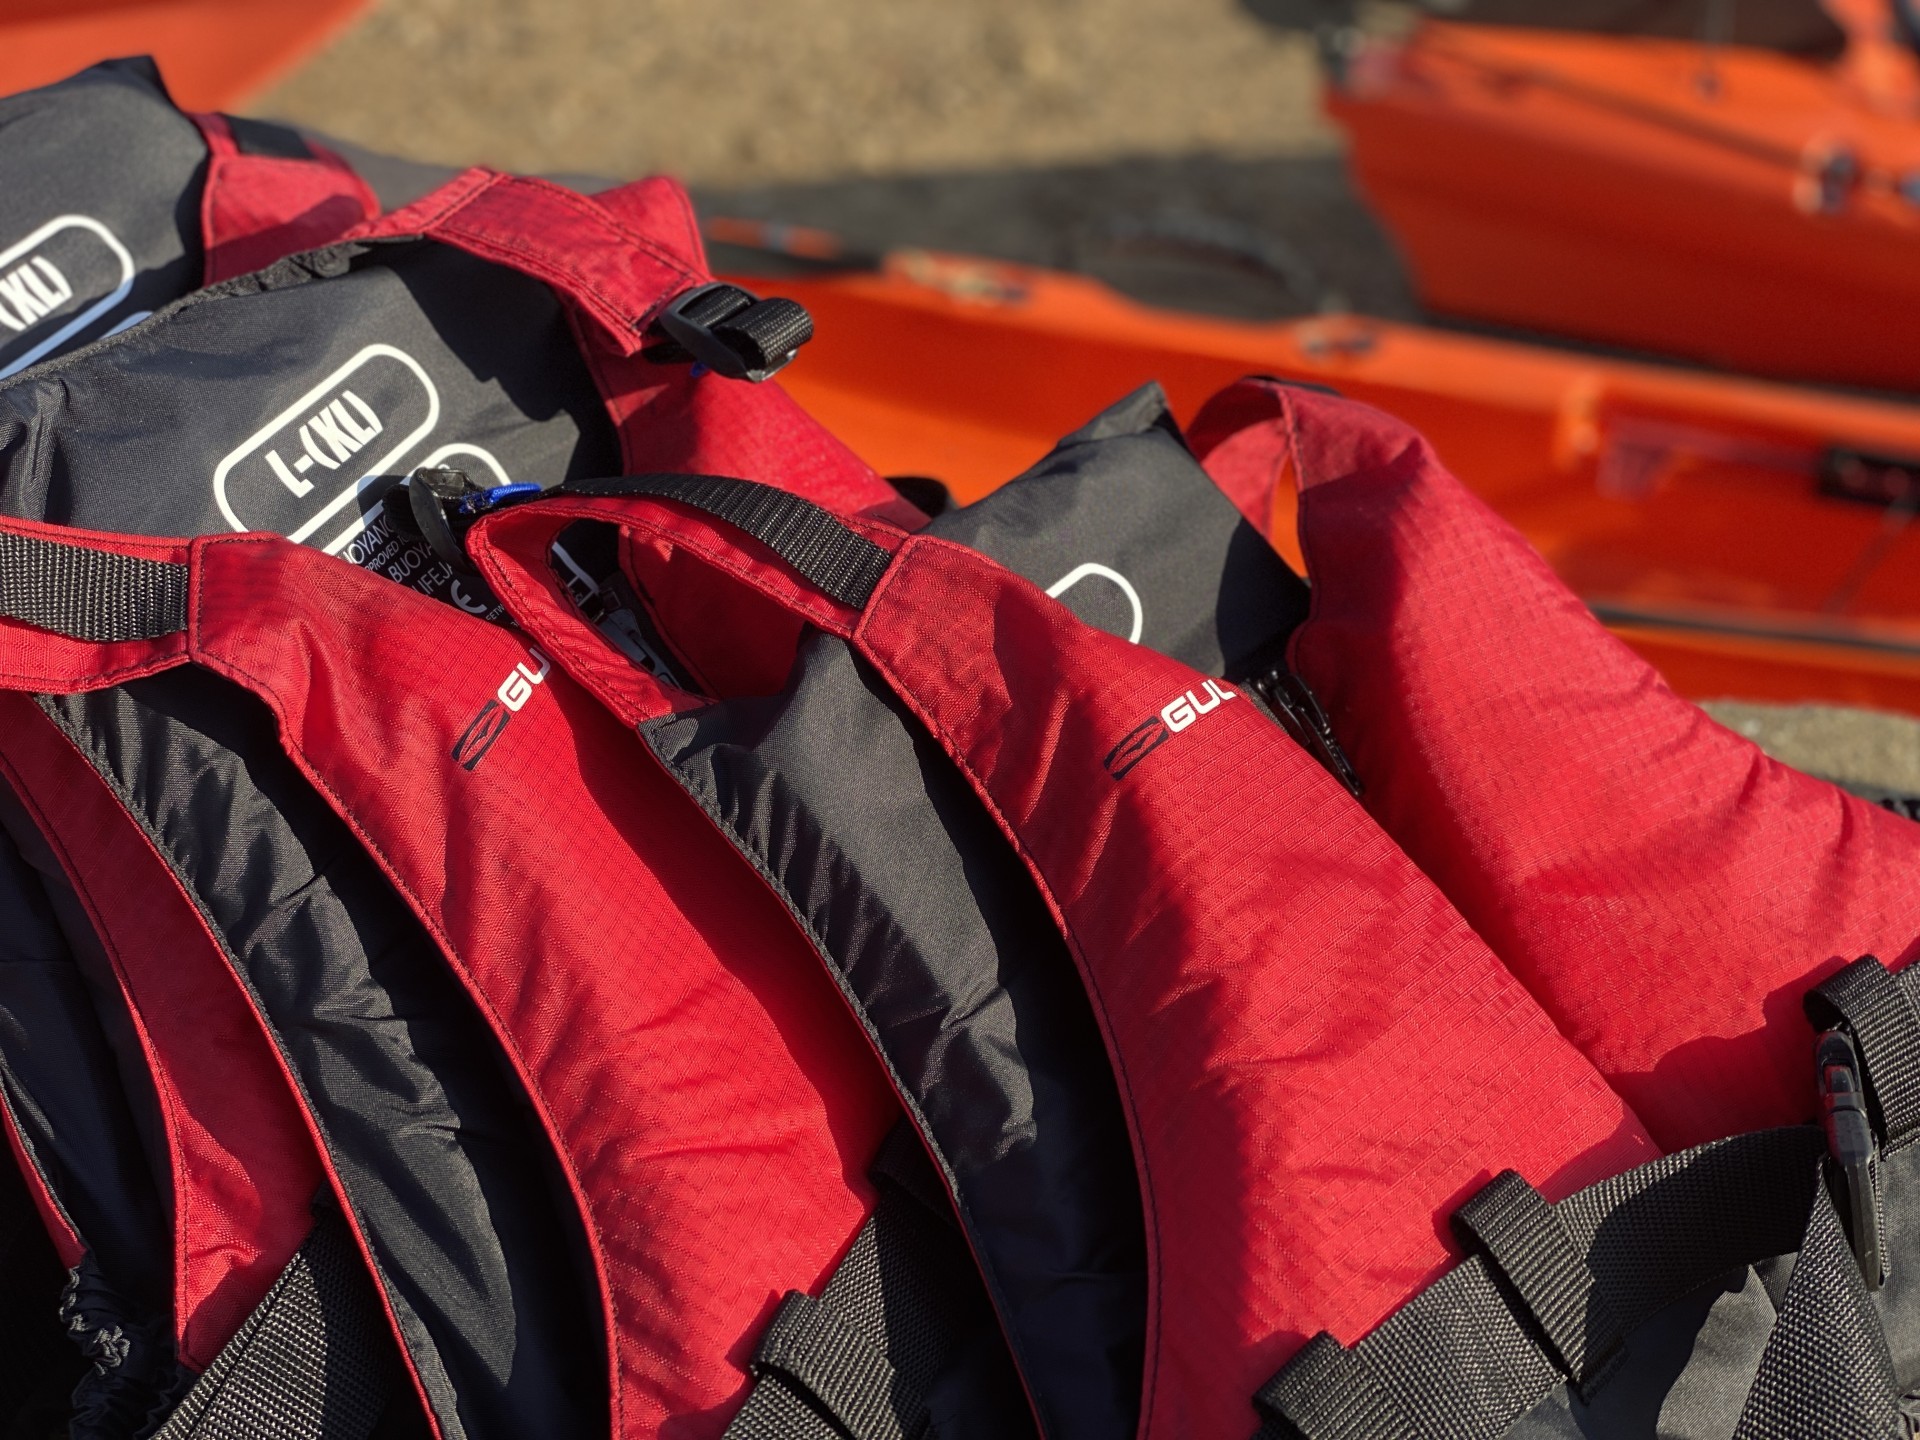 Red buoyancy aids neatly stacked ready for use.